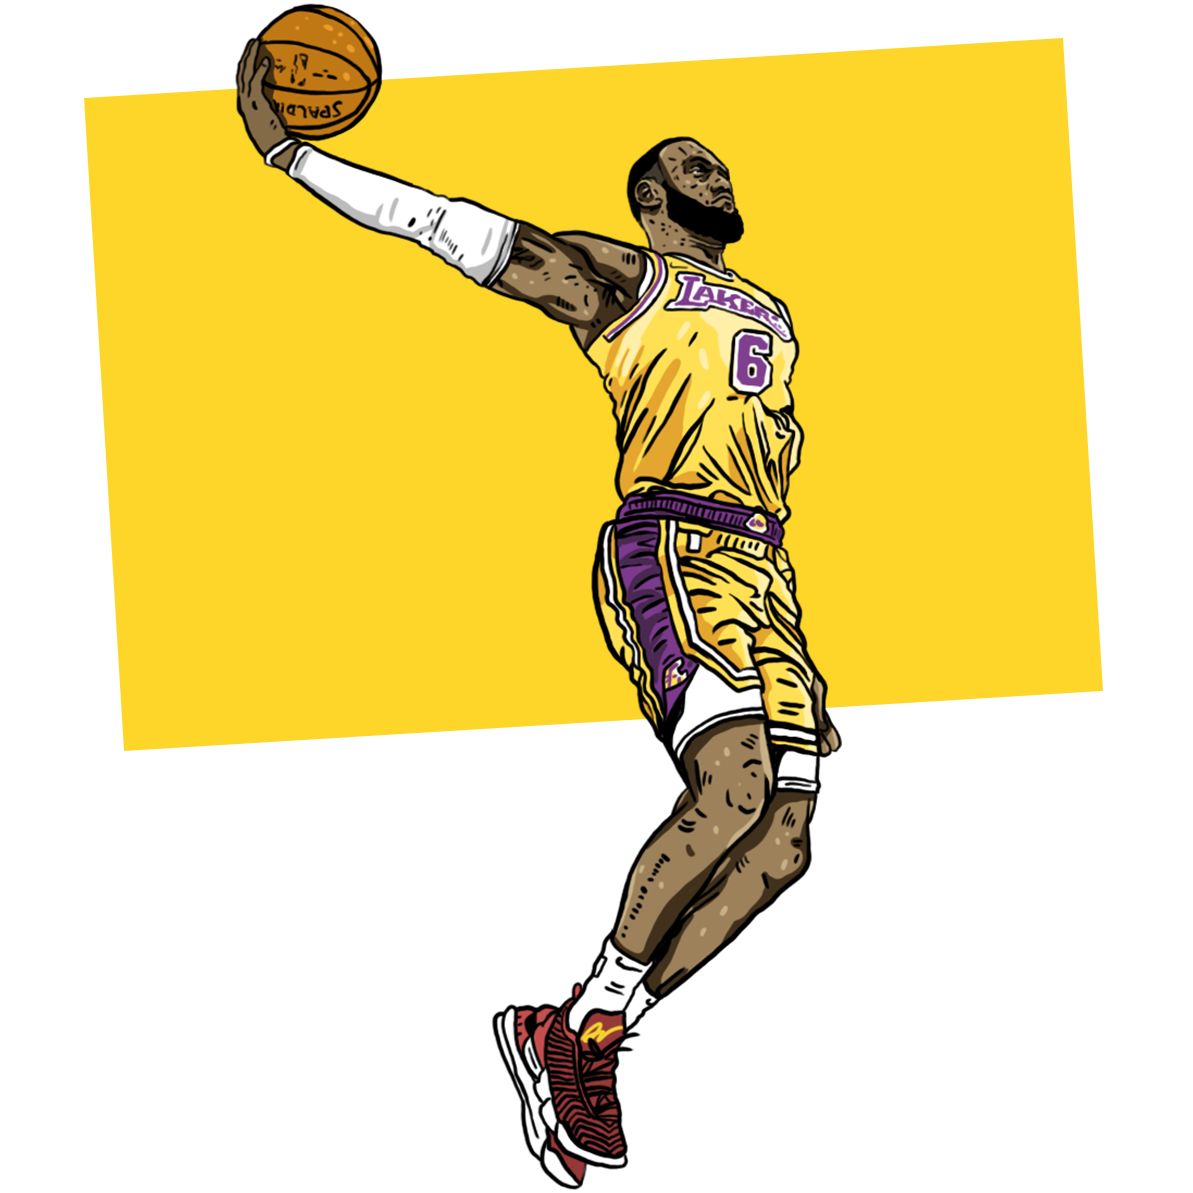 Illustration of LeBron James in a yellow #6 jersey jumping up with a ball in his right hand.